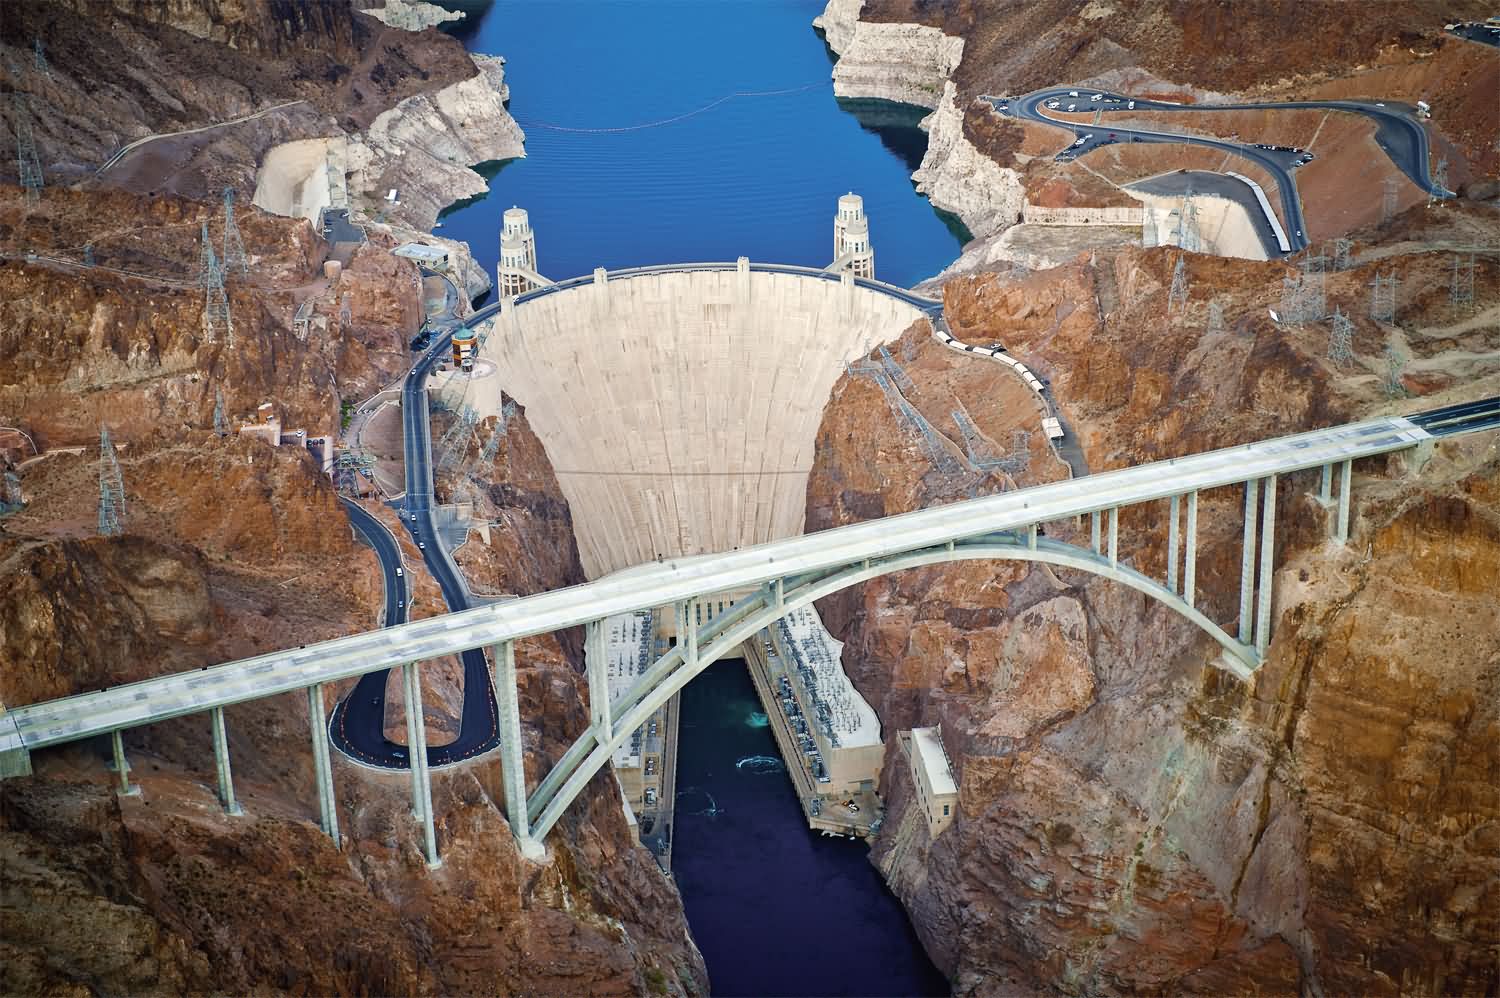 Mike O’Callaghan–Pat Tillman Memorial Bridge also known as Hoover Dam Bypass is America’s second-highest bridge